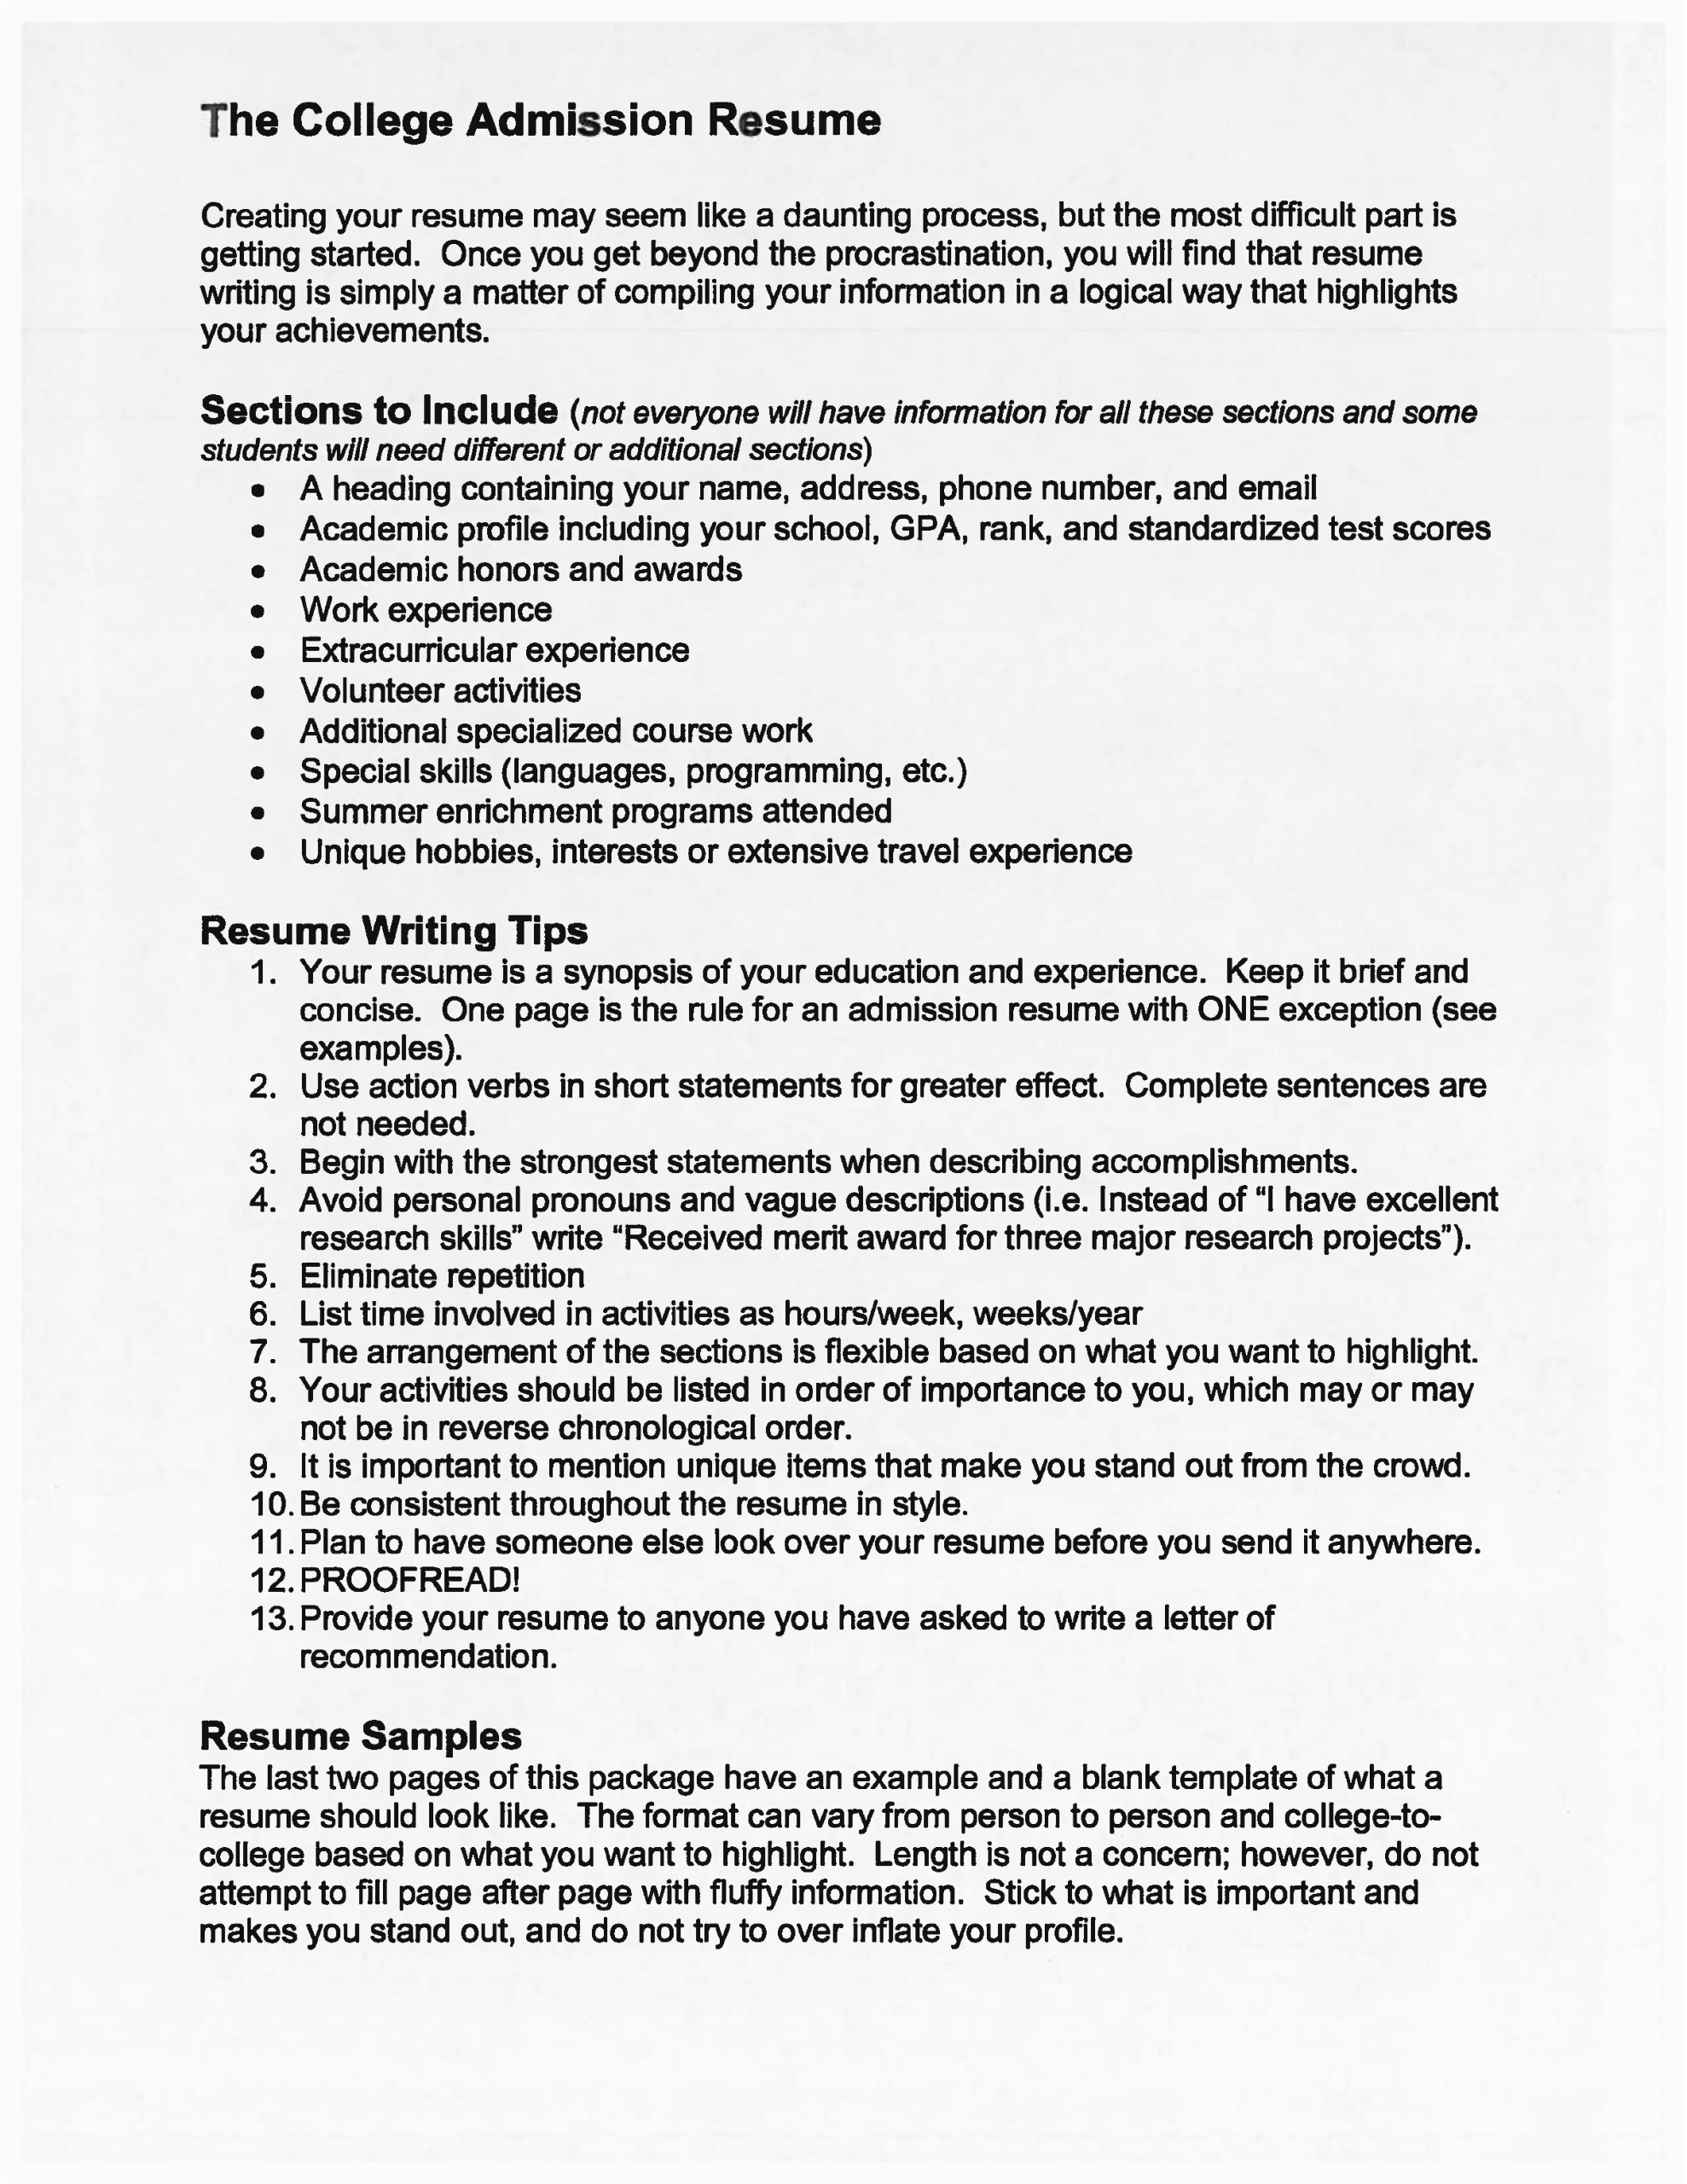 Sample Resume Objective for College Application the College Admission Resume Free Download